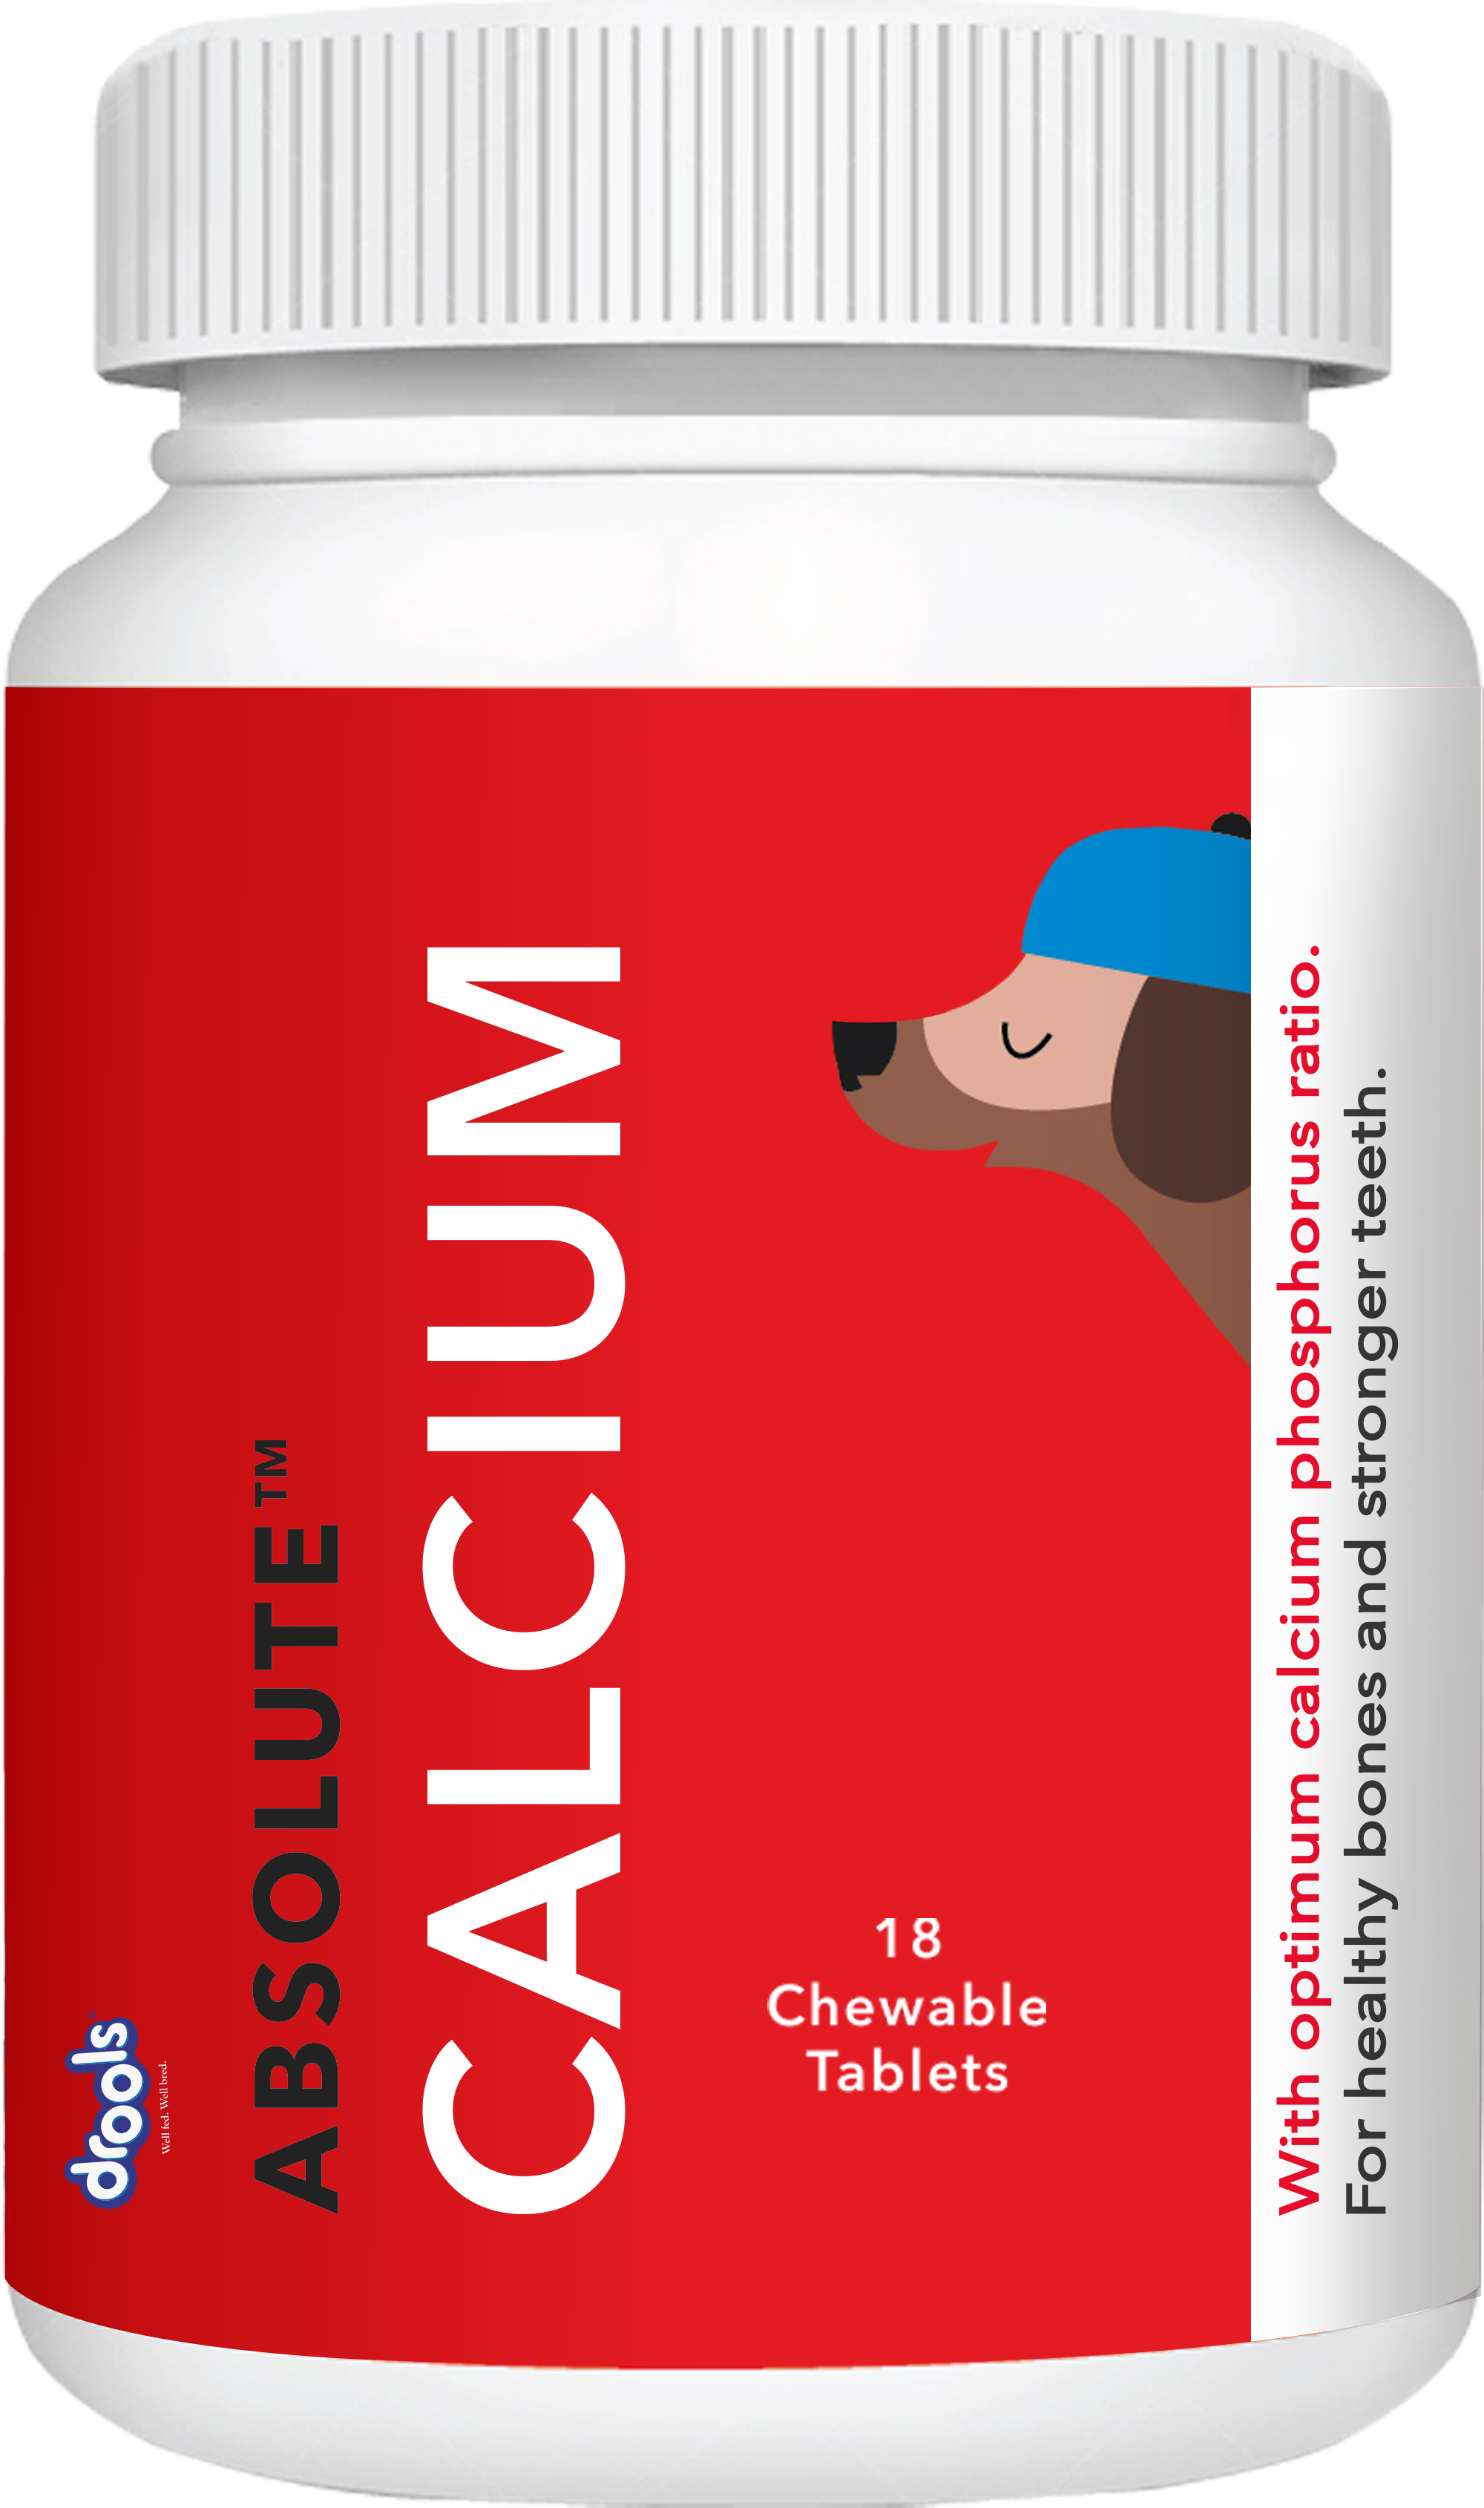 Absolute Calcium Tablets